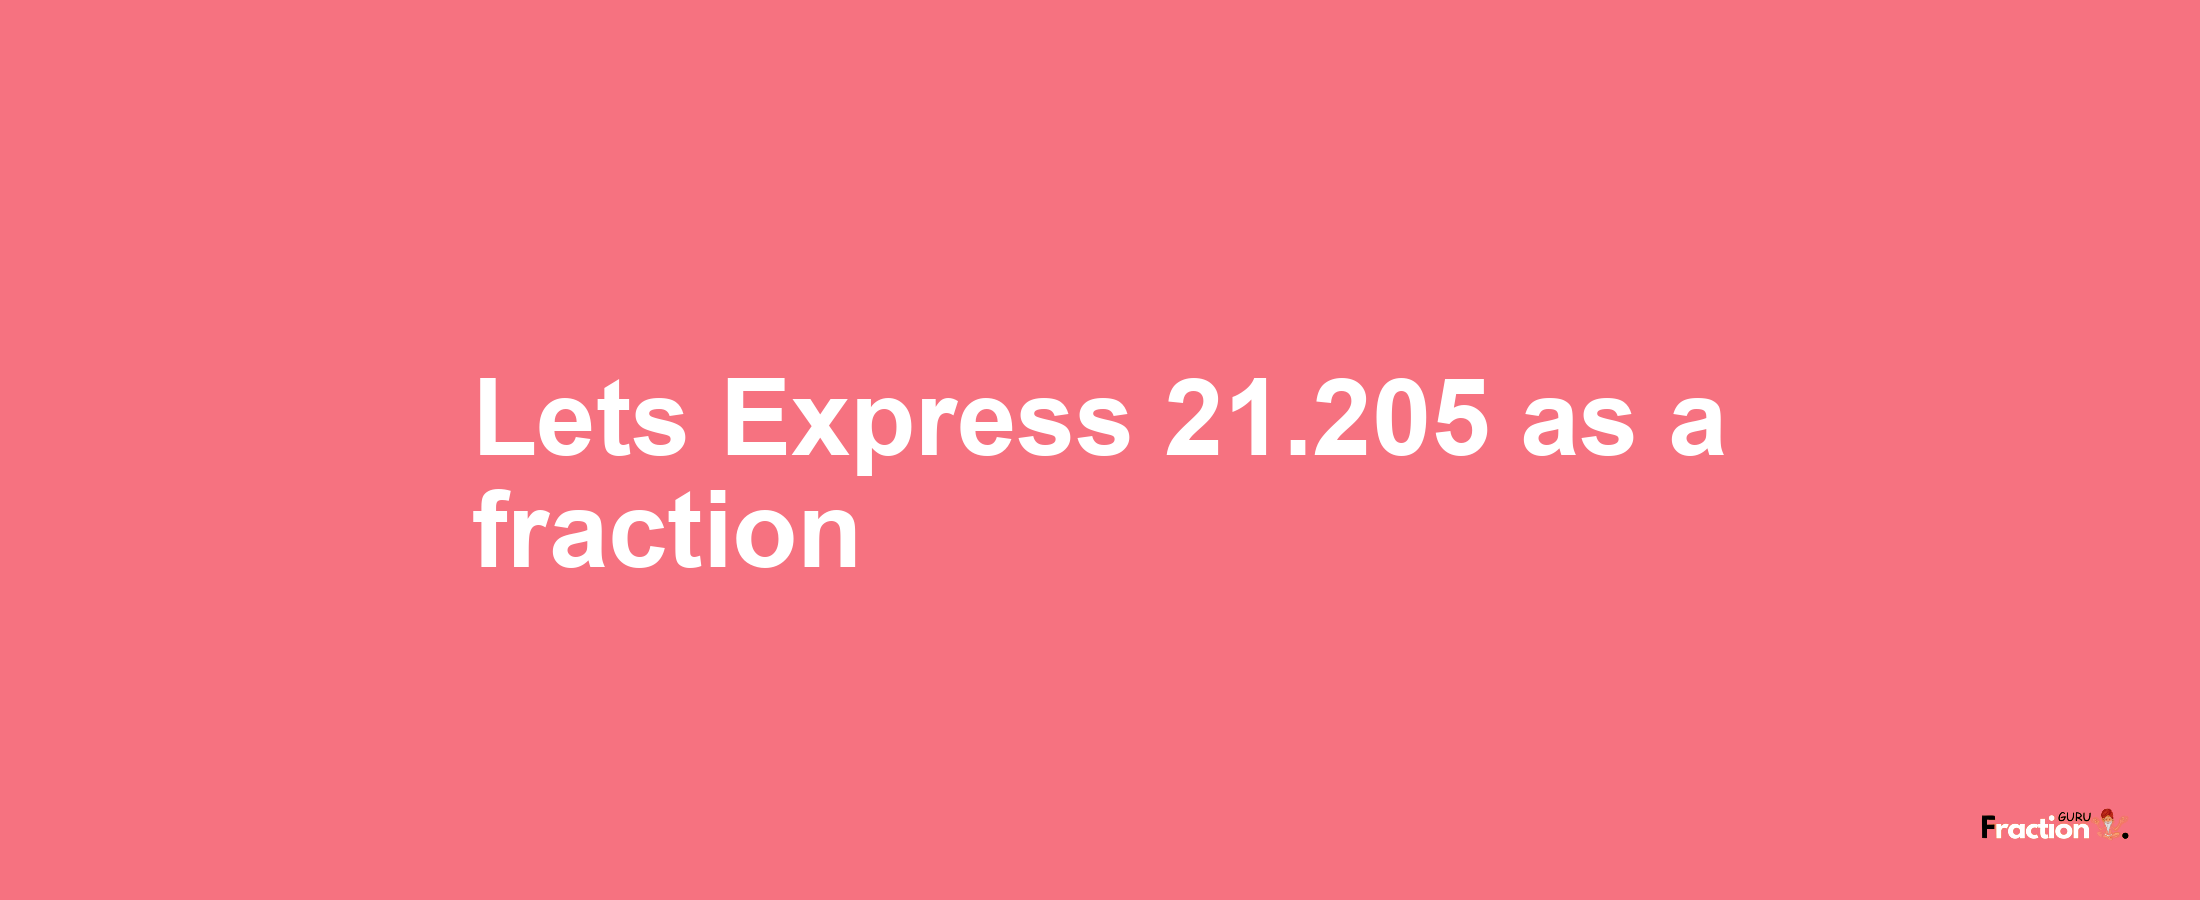 Lets Express 21.205 as afraction